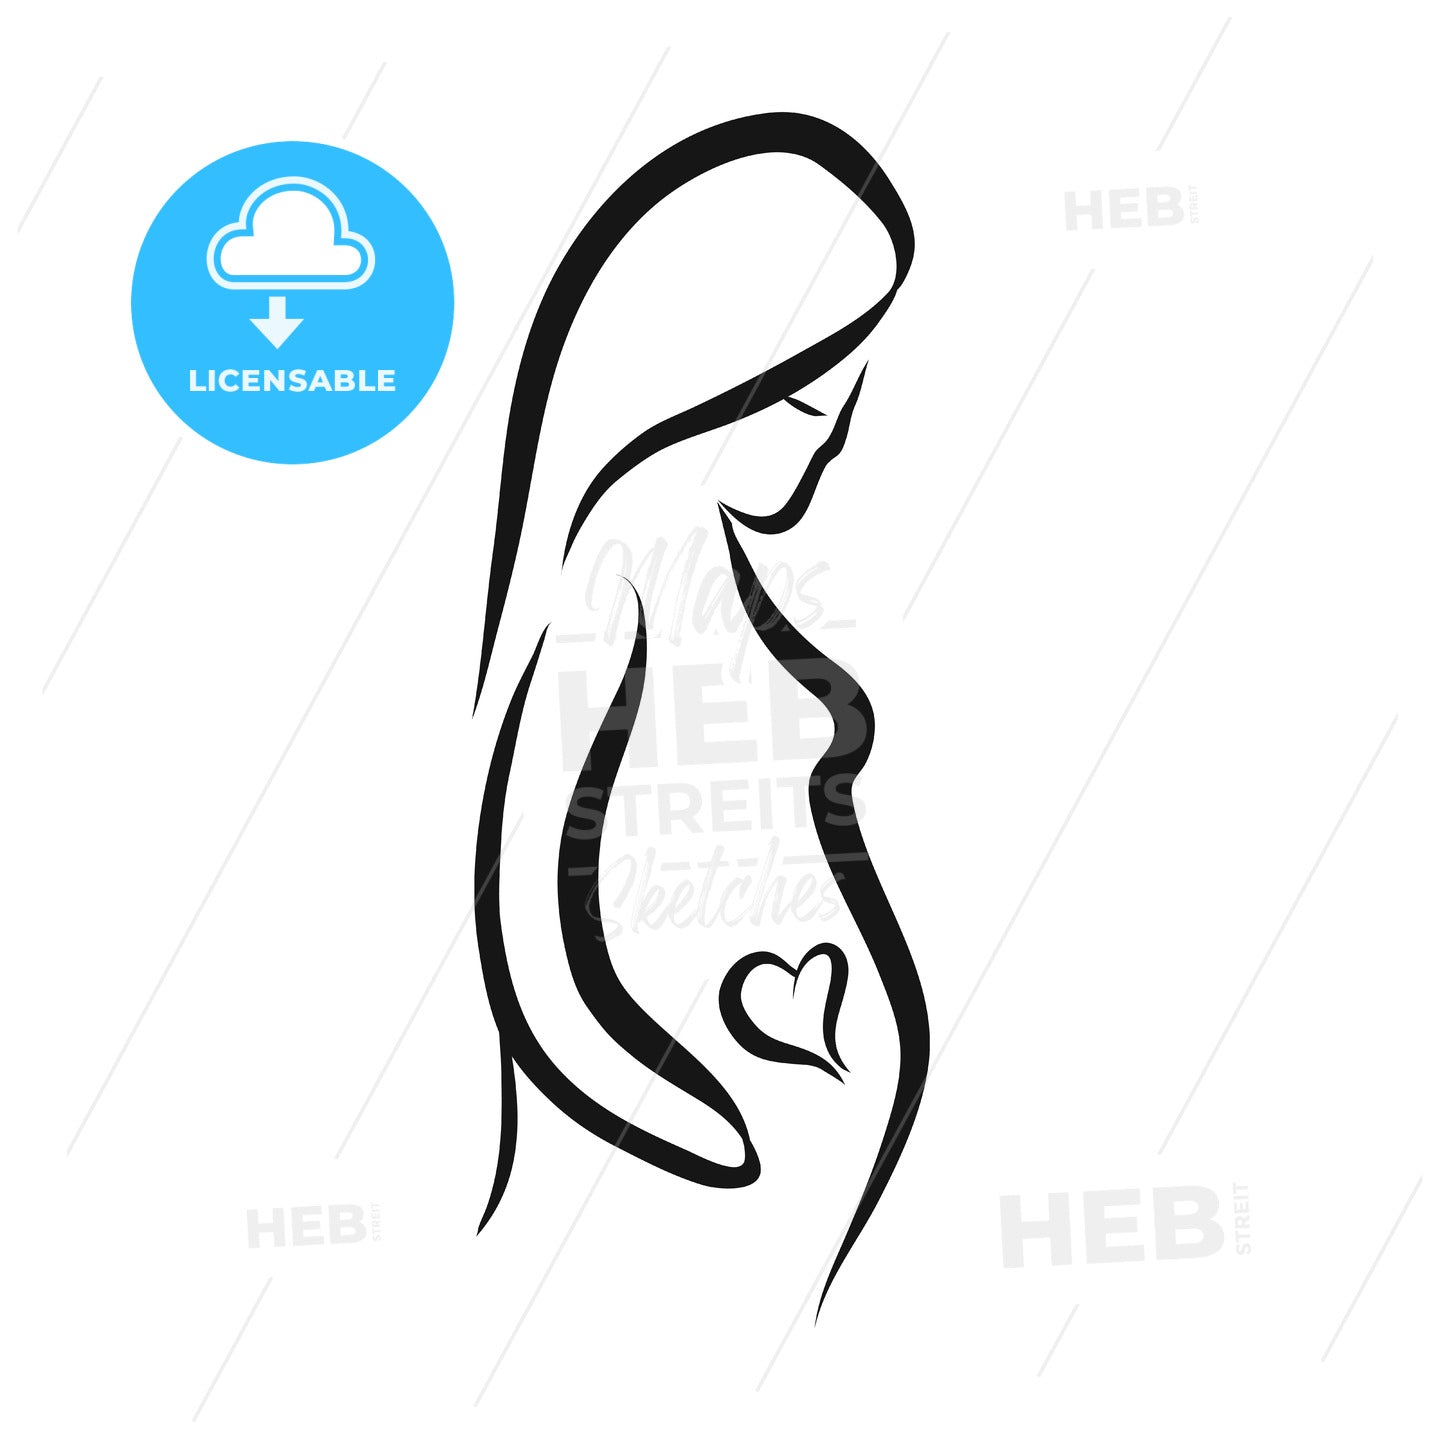 Pregnant woman with heart inside – instant download